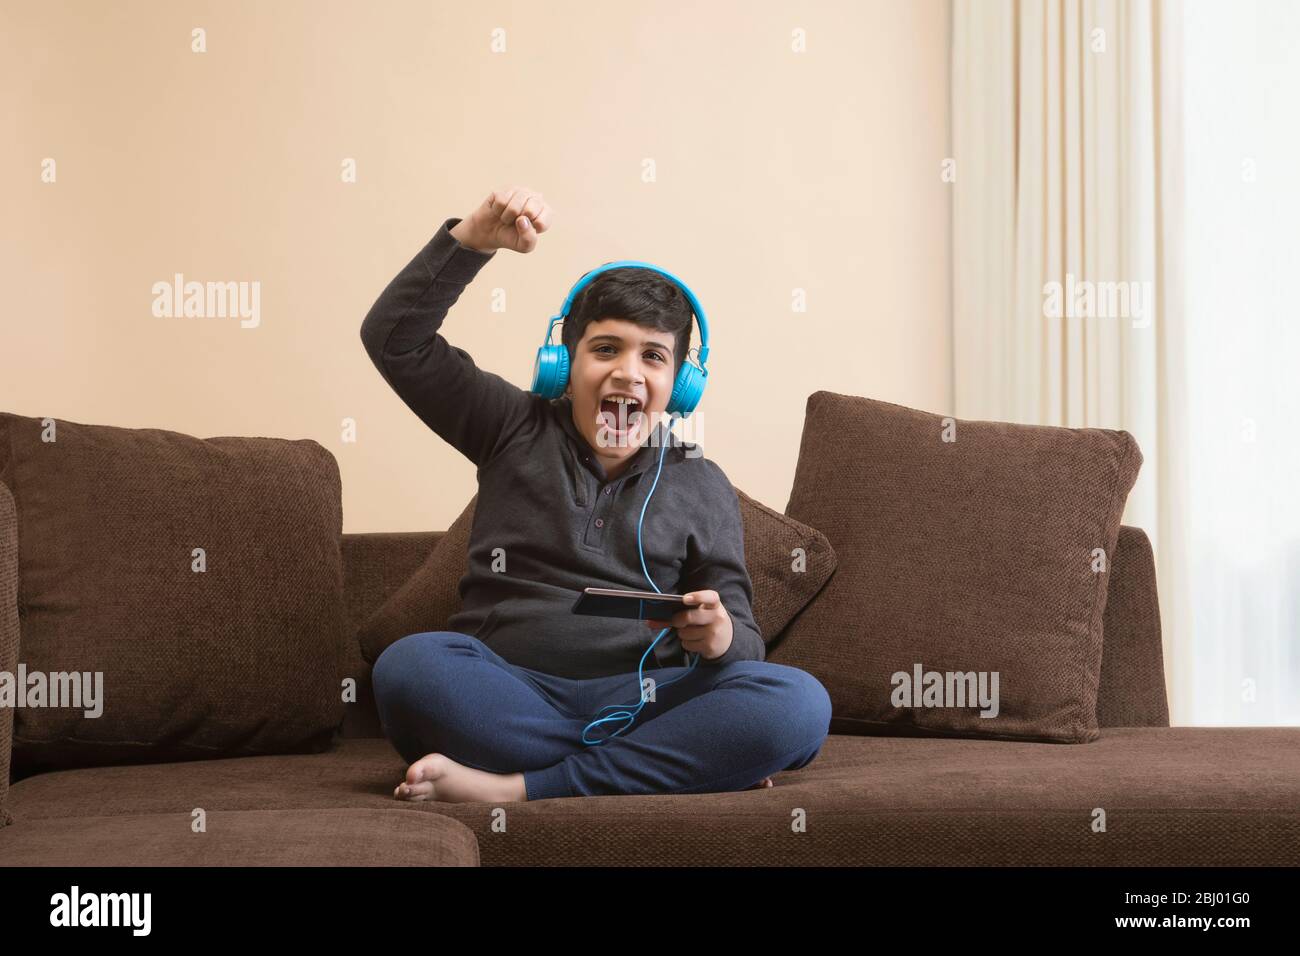 Boy smiling while listening to music with headphones on sofa Stock Photo